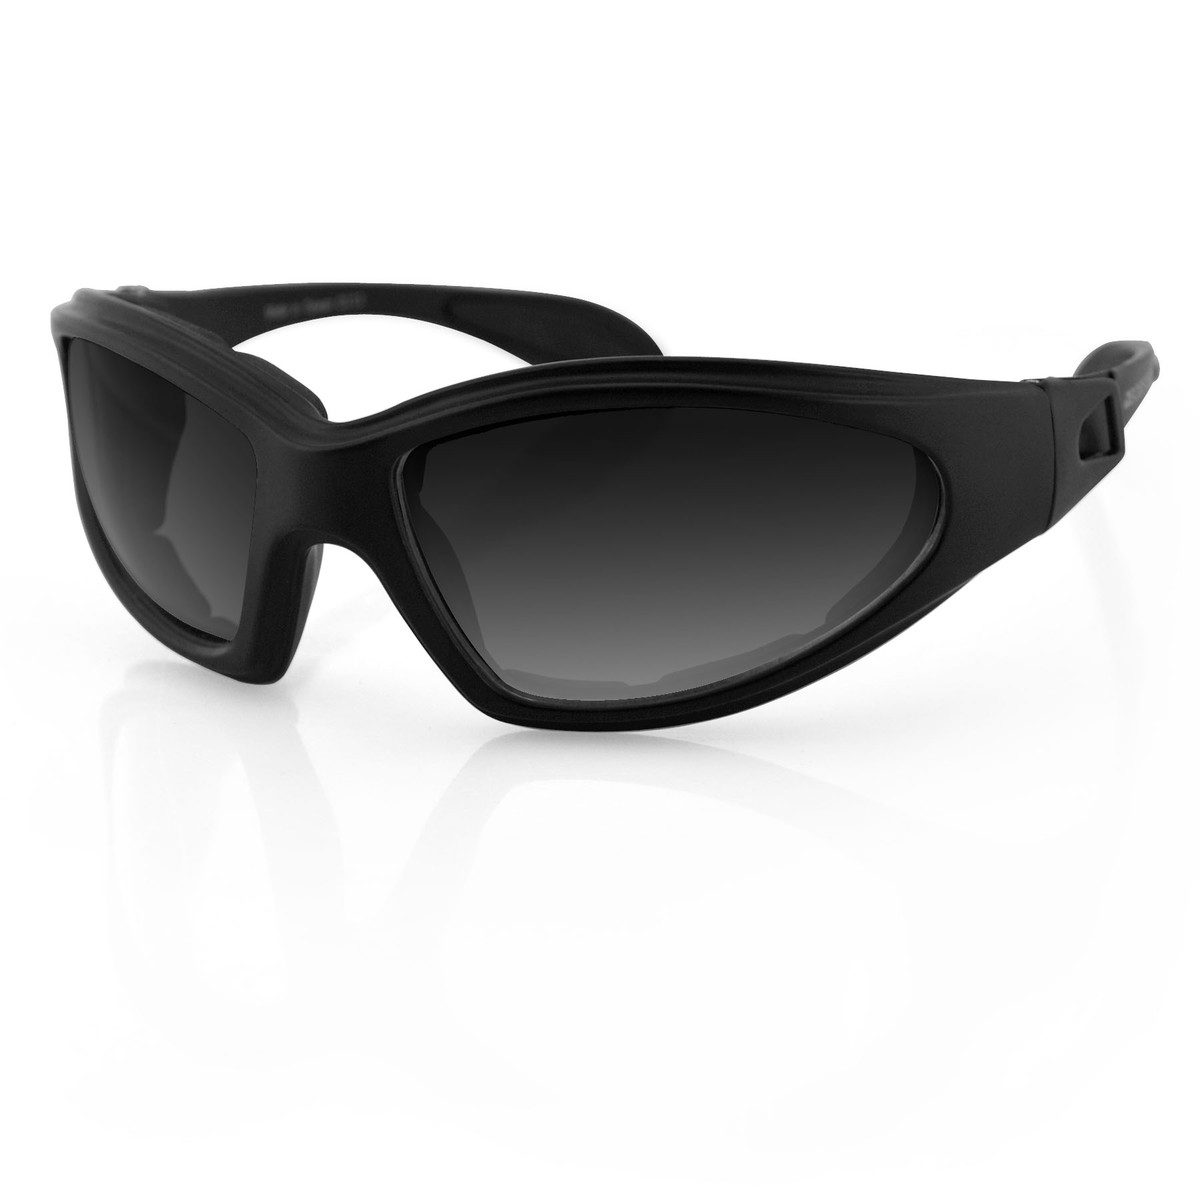 Bobster GXR Shatter Resistant Sunglasses that Float - Newest Products